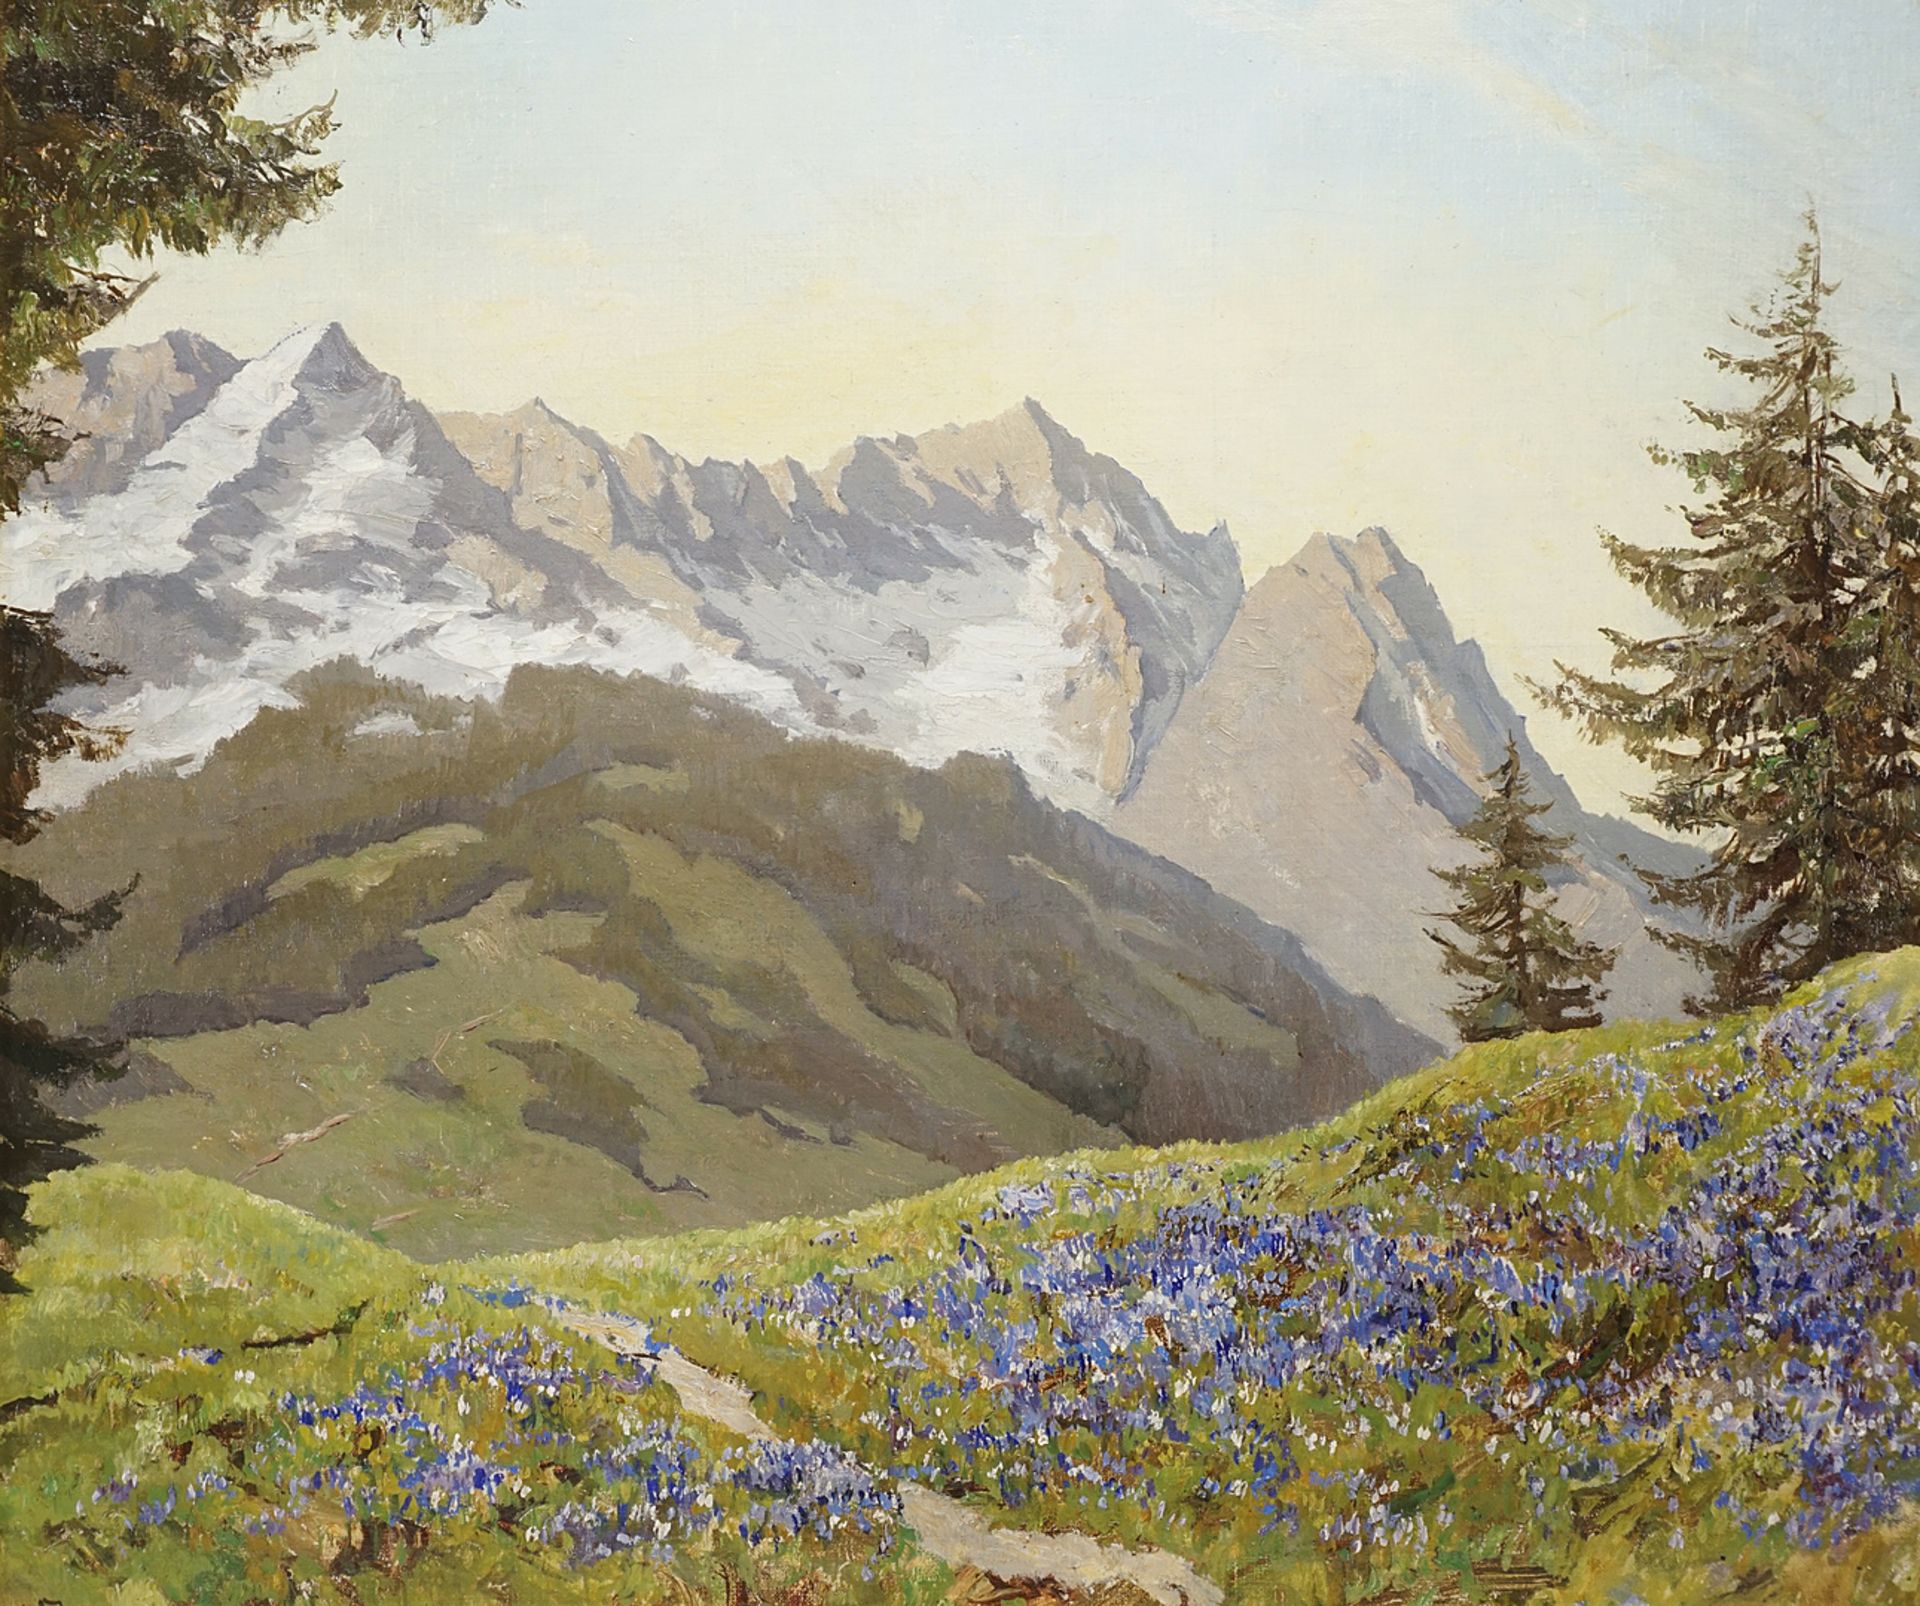 Elisabeth Ribbe-Fischer (1894-?), Gentian blossom in the high mountains